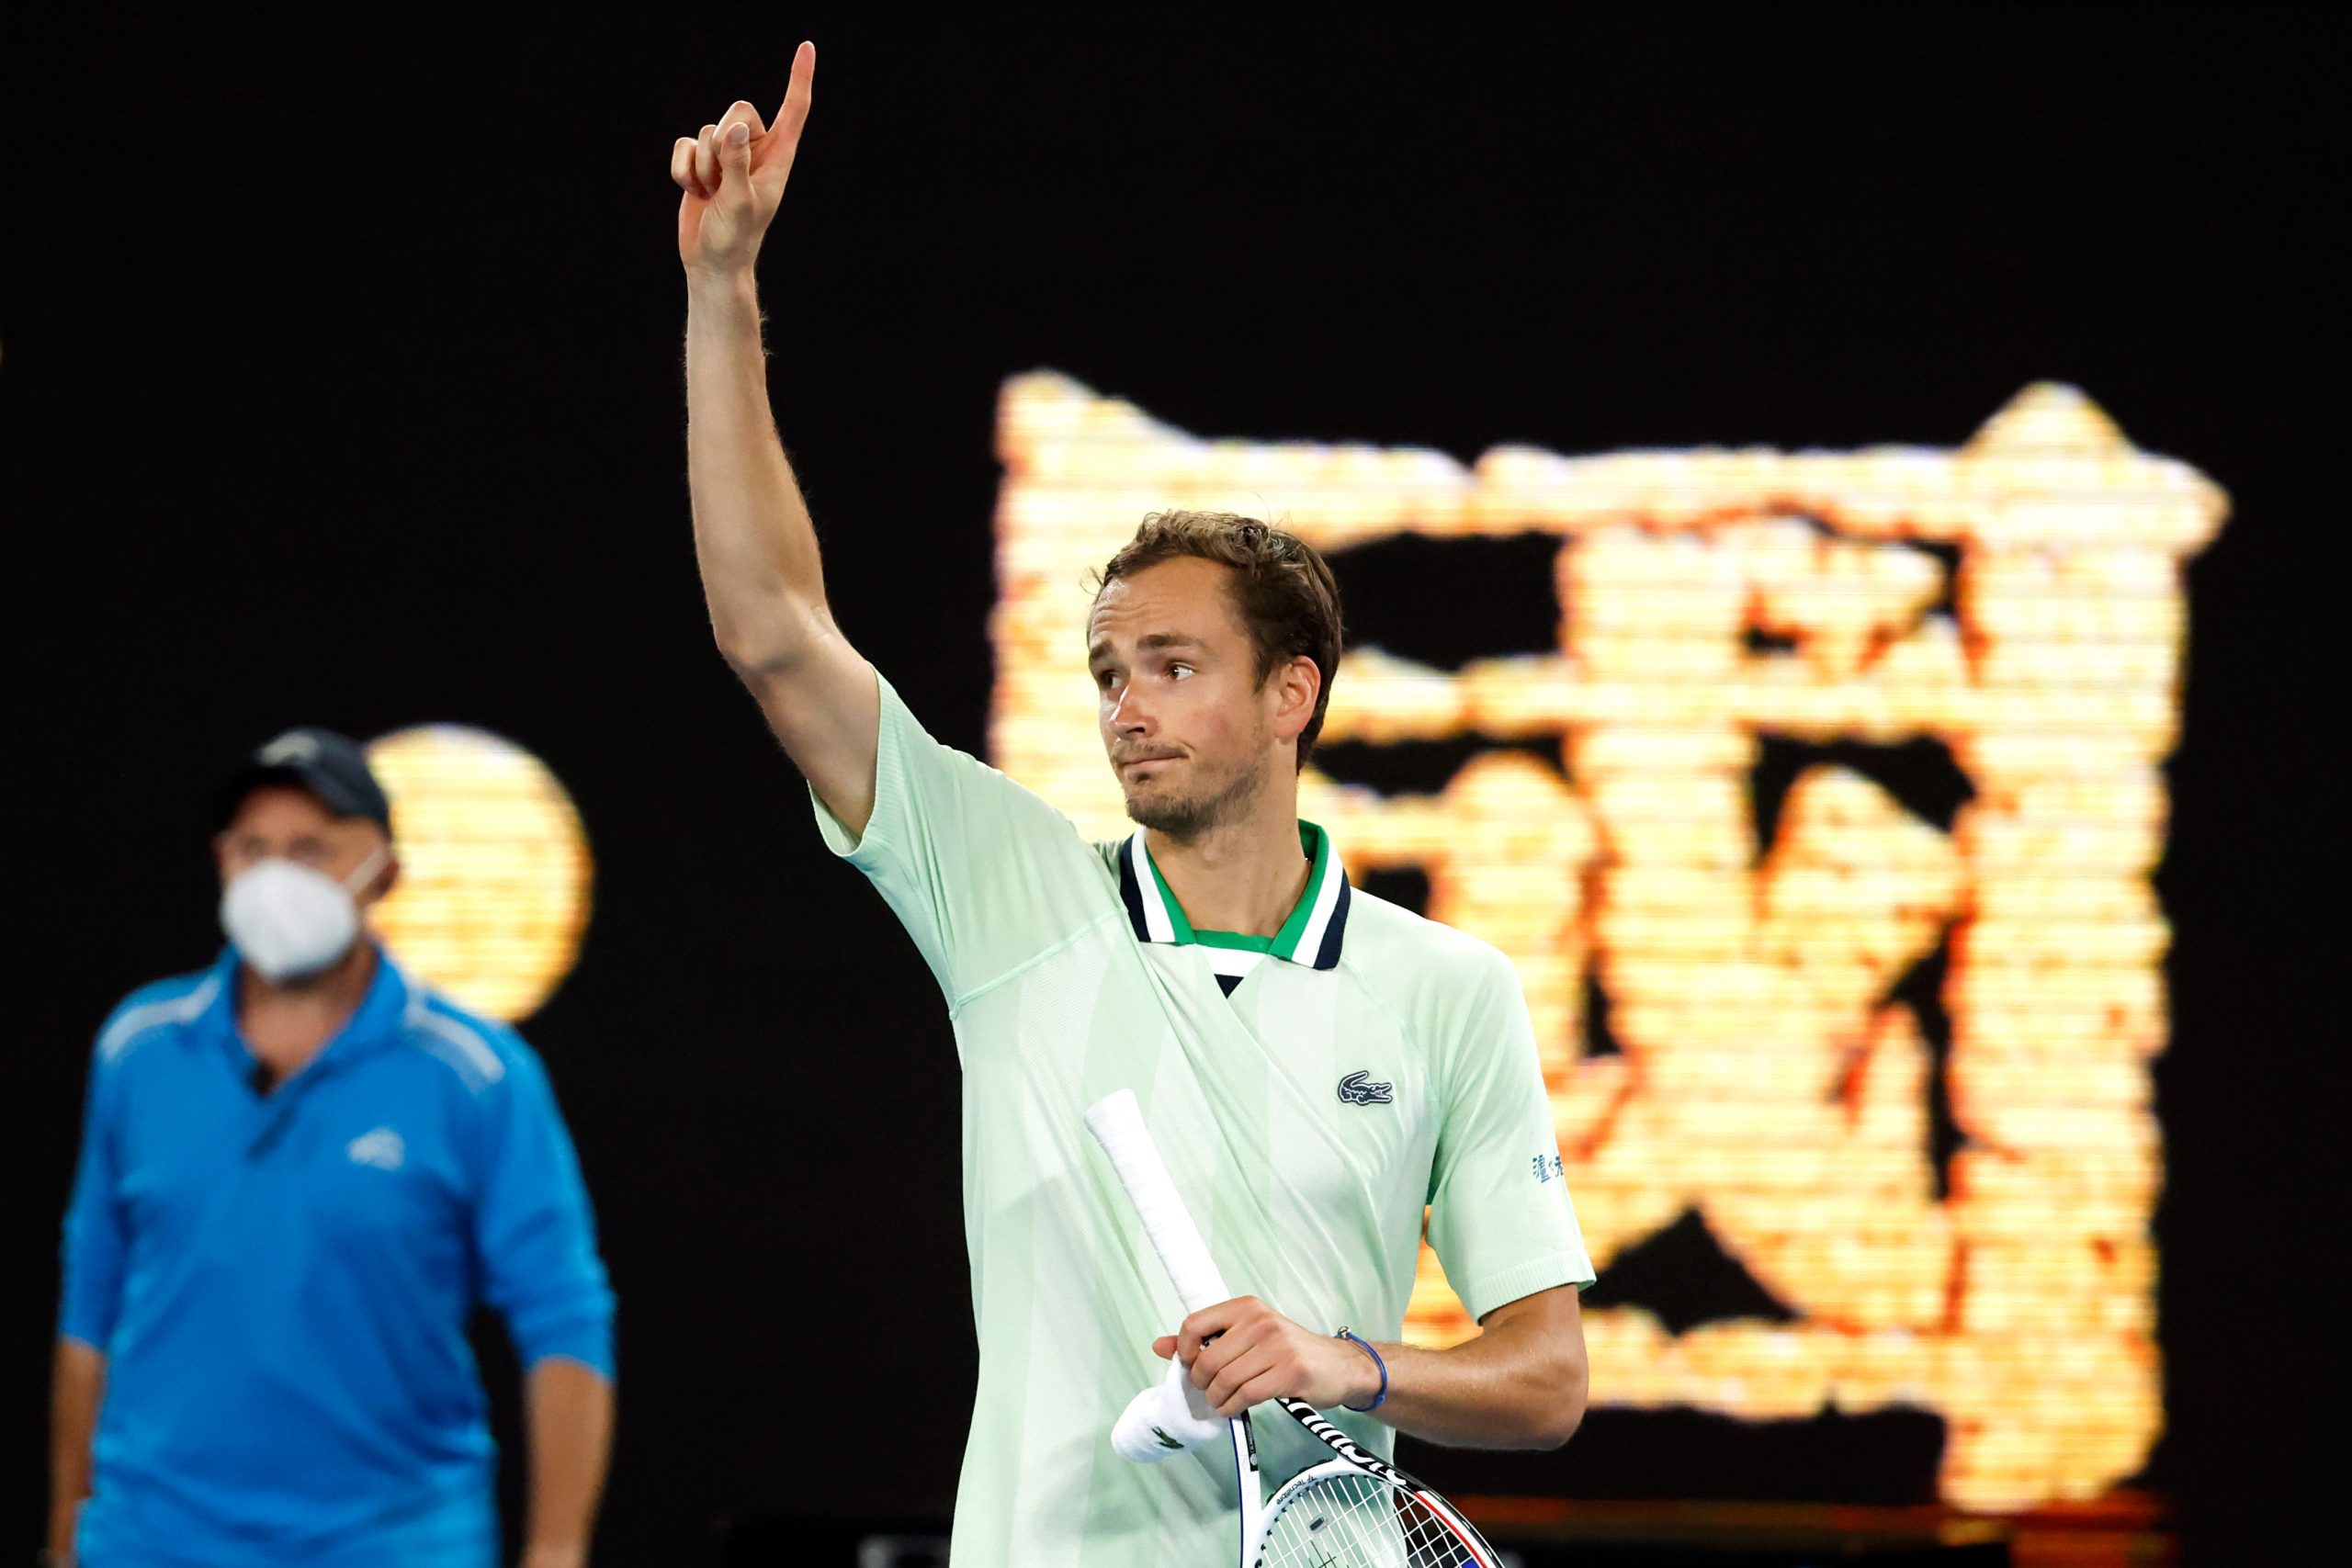 Australian Open: Medvedev bests Kyrgios and hostile crowd, to reach Round 3